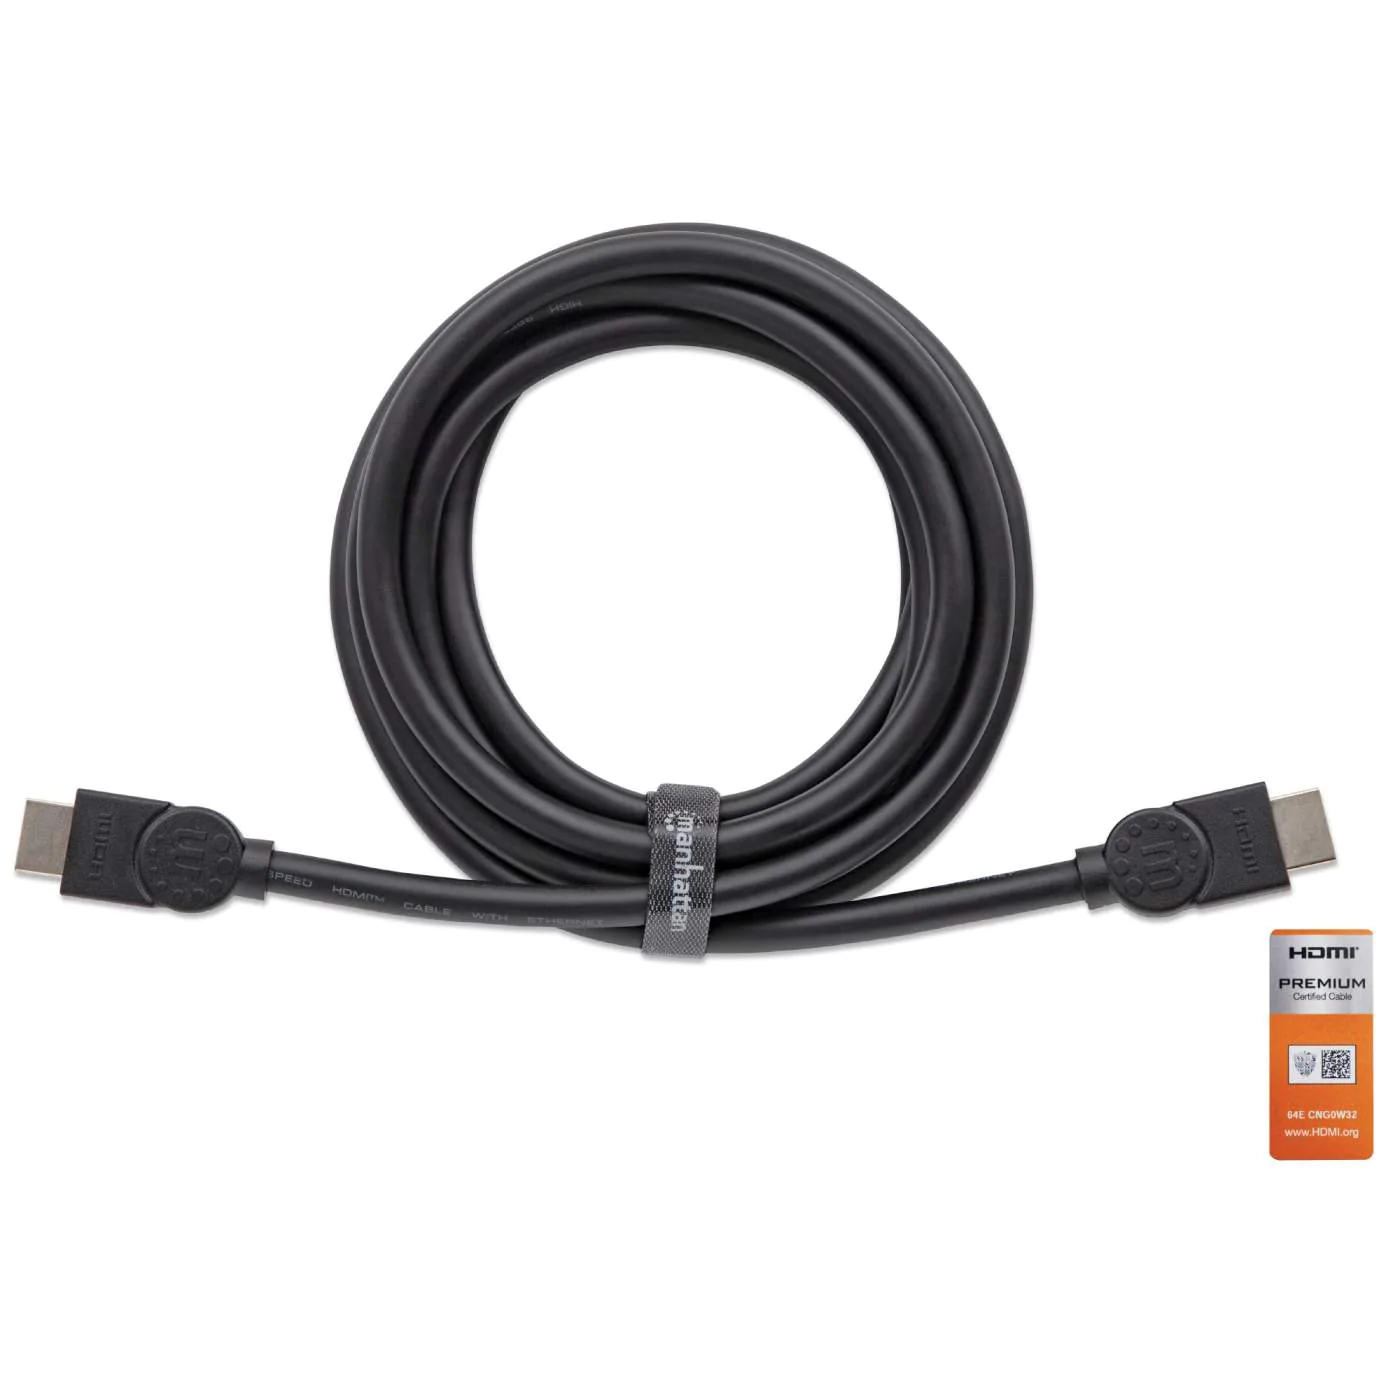 Manhattan 355346 Premium High Speed HDMI Cable with Ethernet,